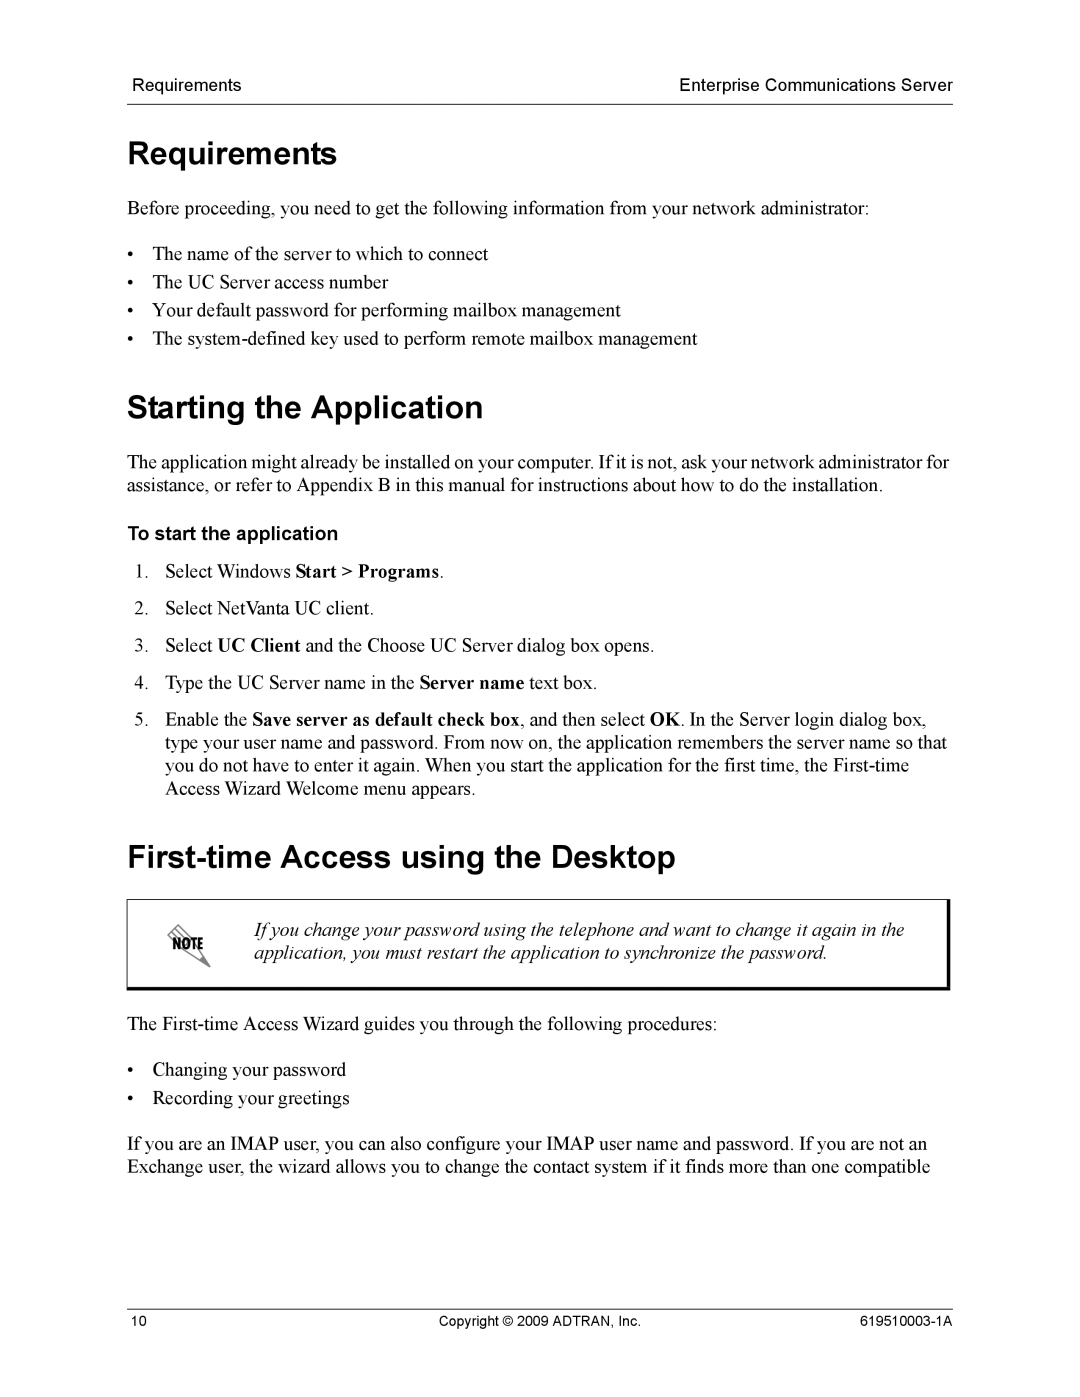 ADTRAN 619510003-1A Requirements, Starting the Application, First-time Access using the Desktop, To start the application 